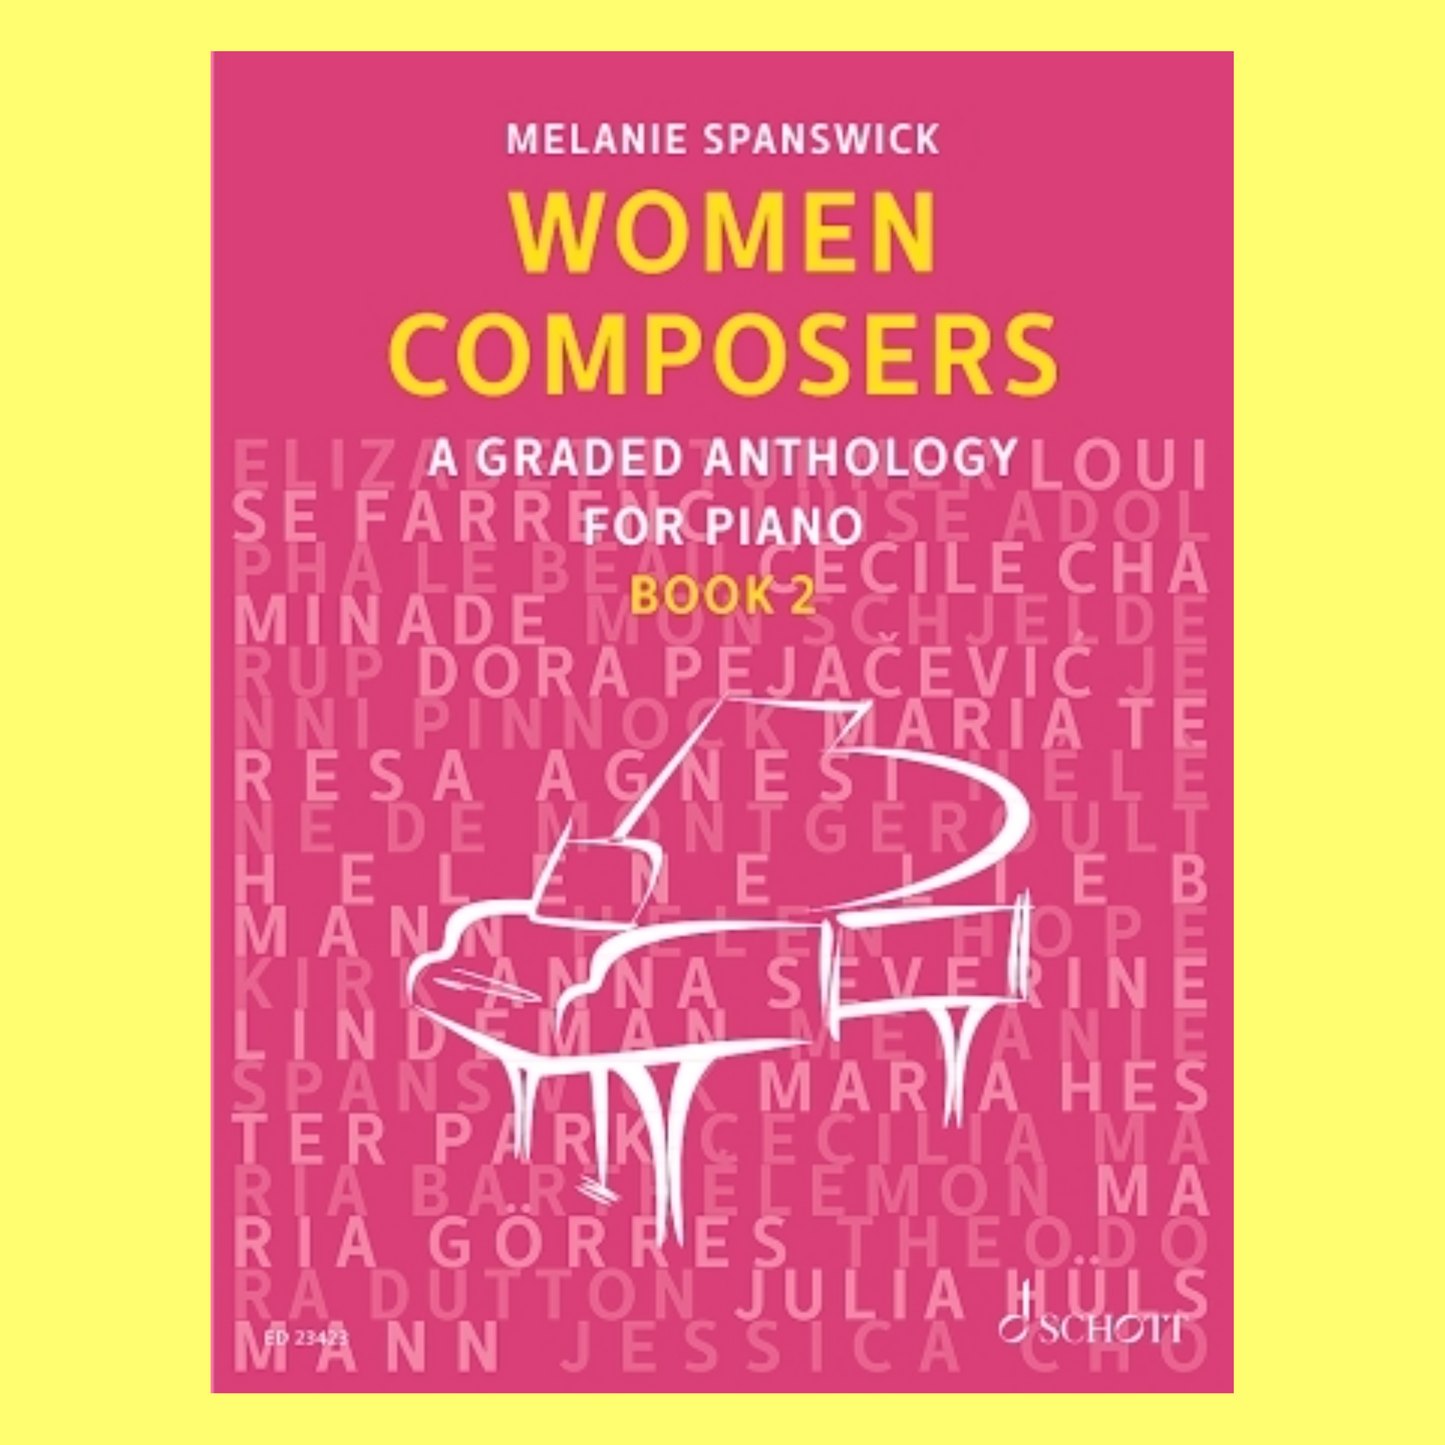 Women Composers Book 2 - A Graded Anthology for Piano